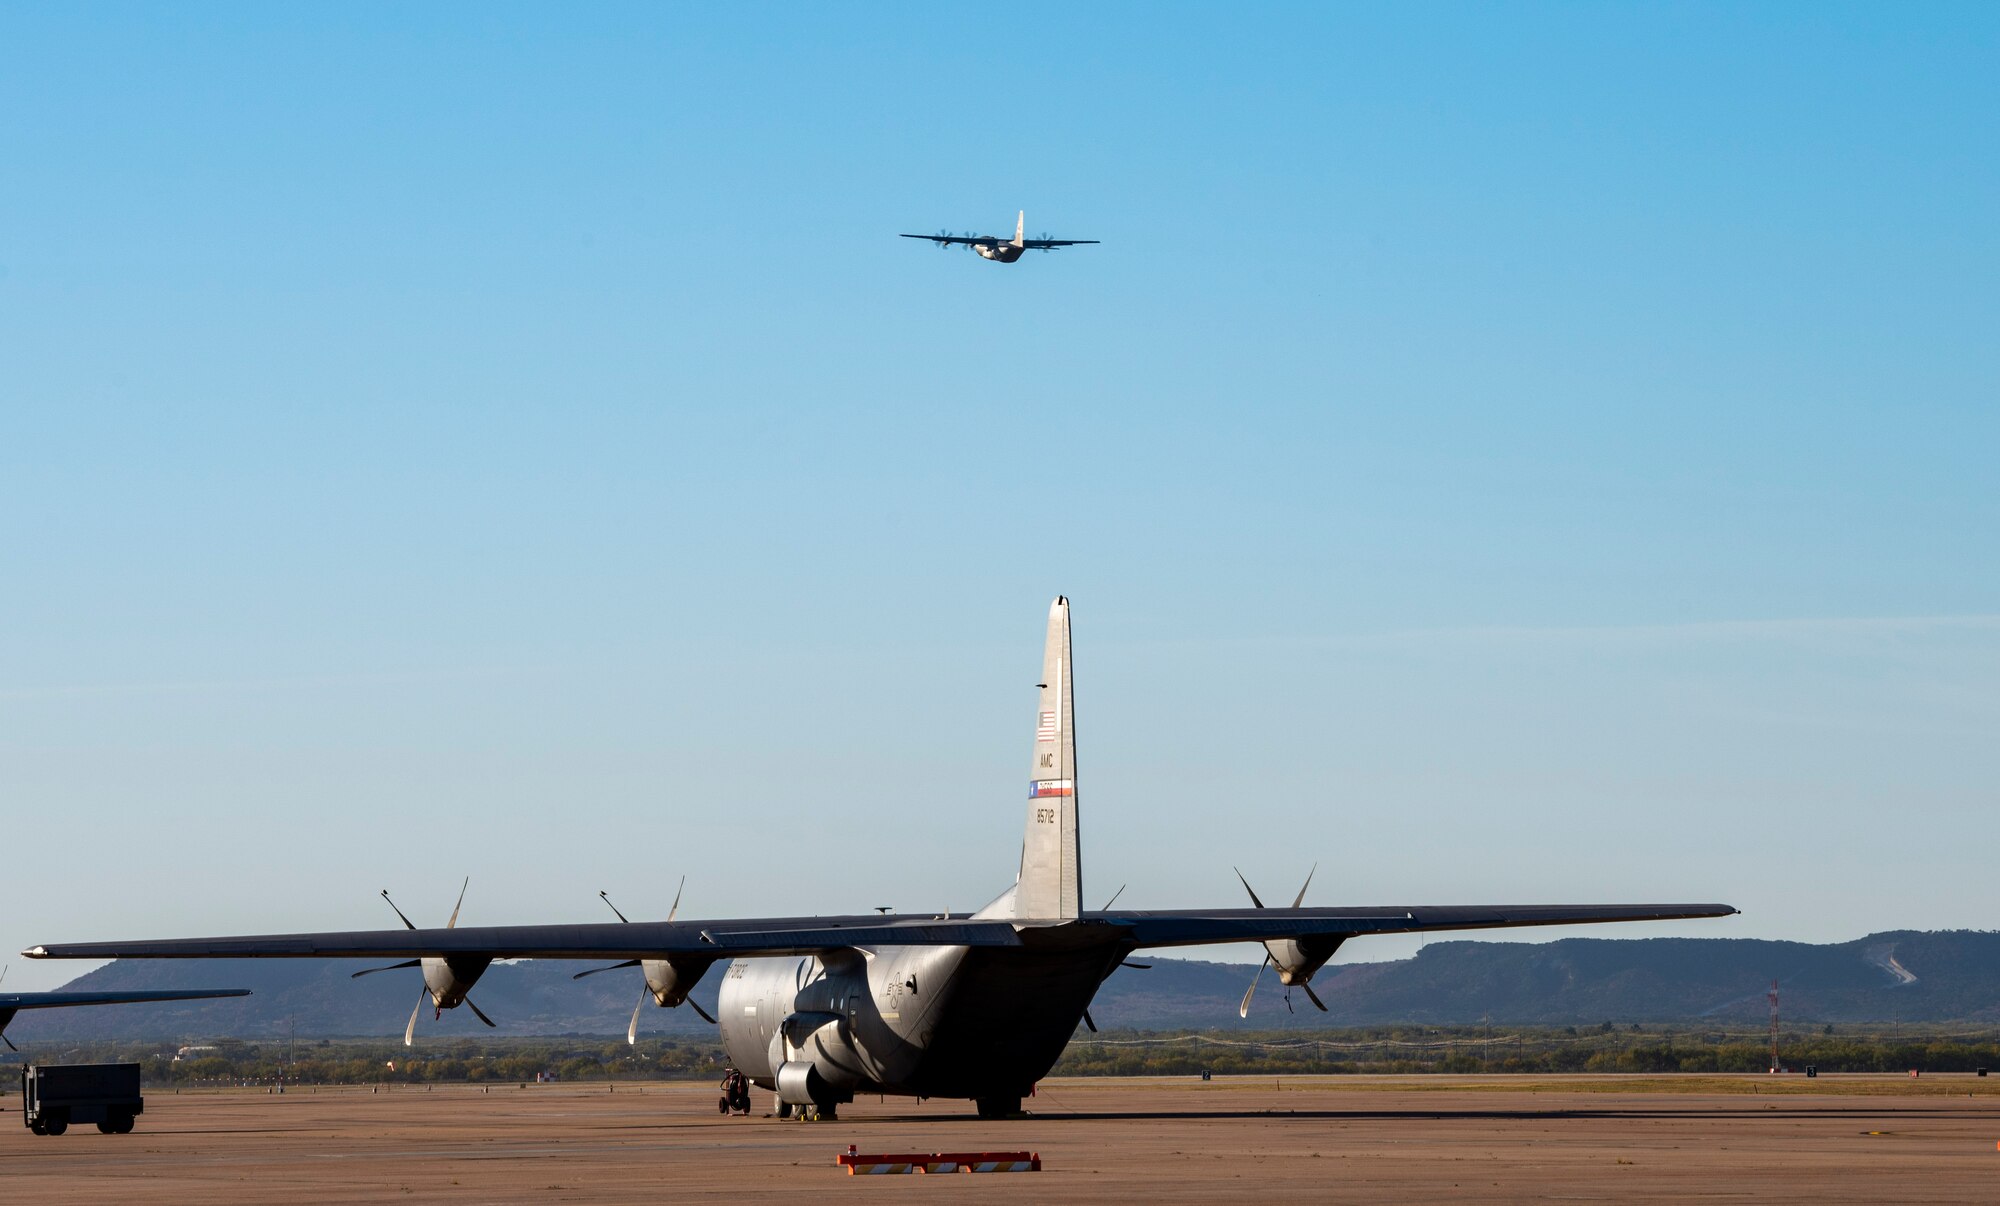 A C-130J Super Hercules takes off from the flightline during Exercise Chemical Fury at Dyess Air Force Base, Texas, Nov. 17, 2020.